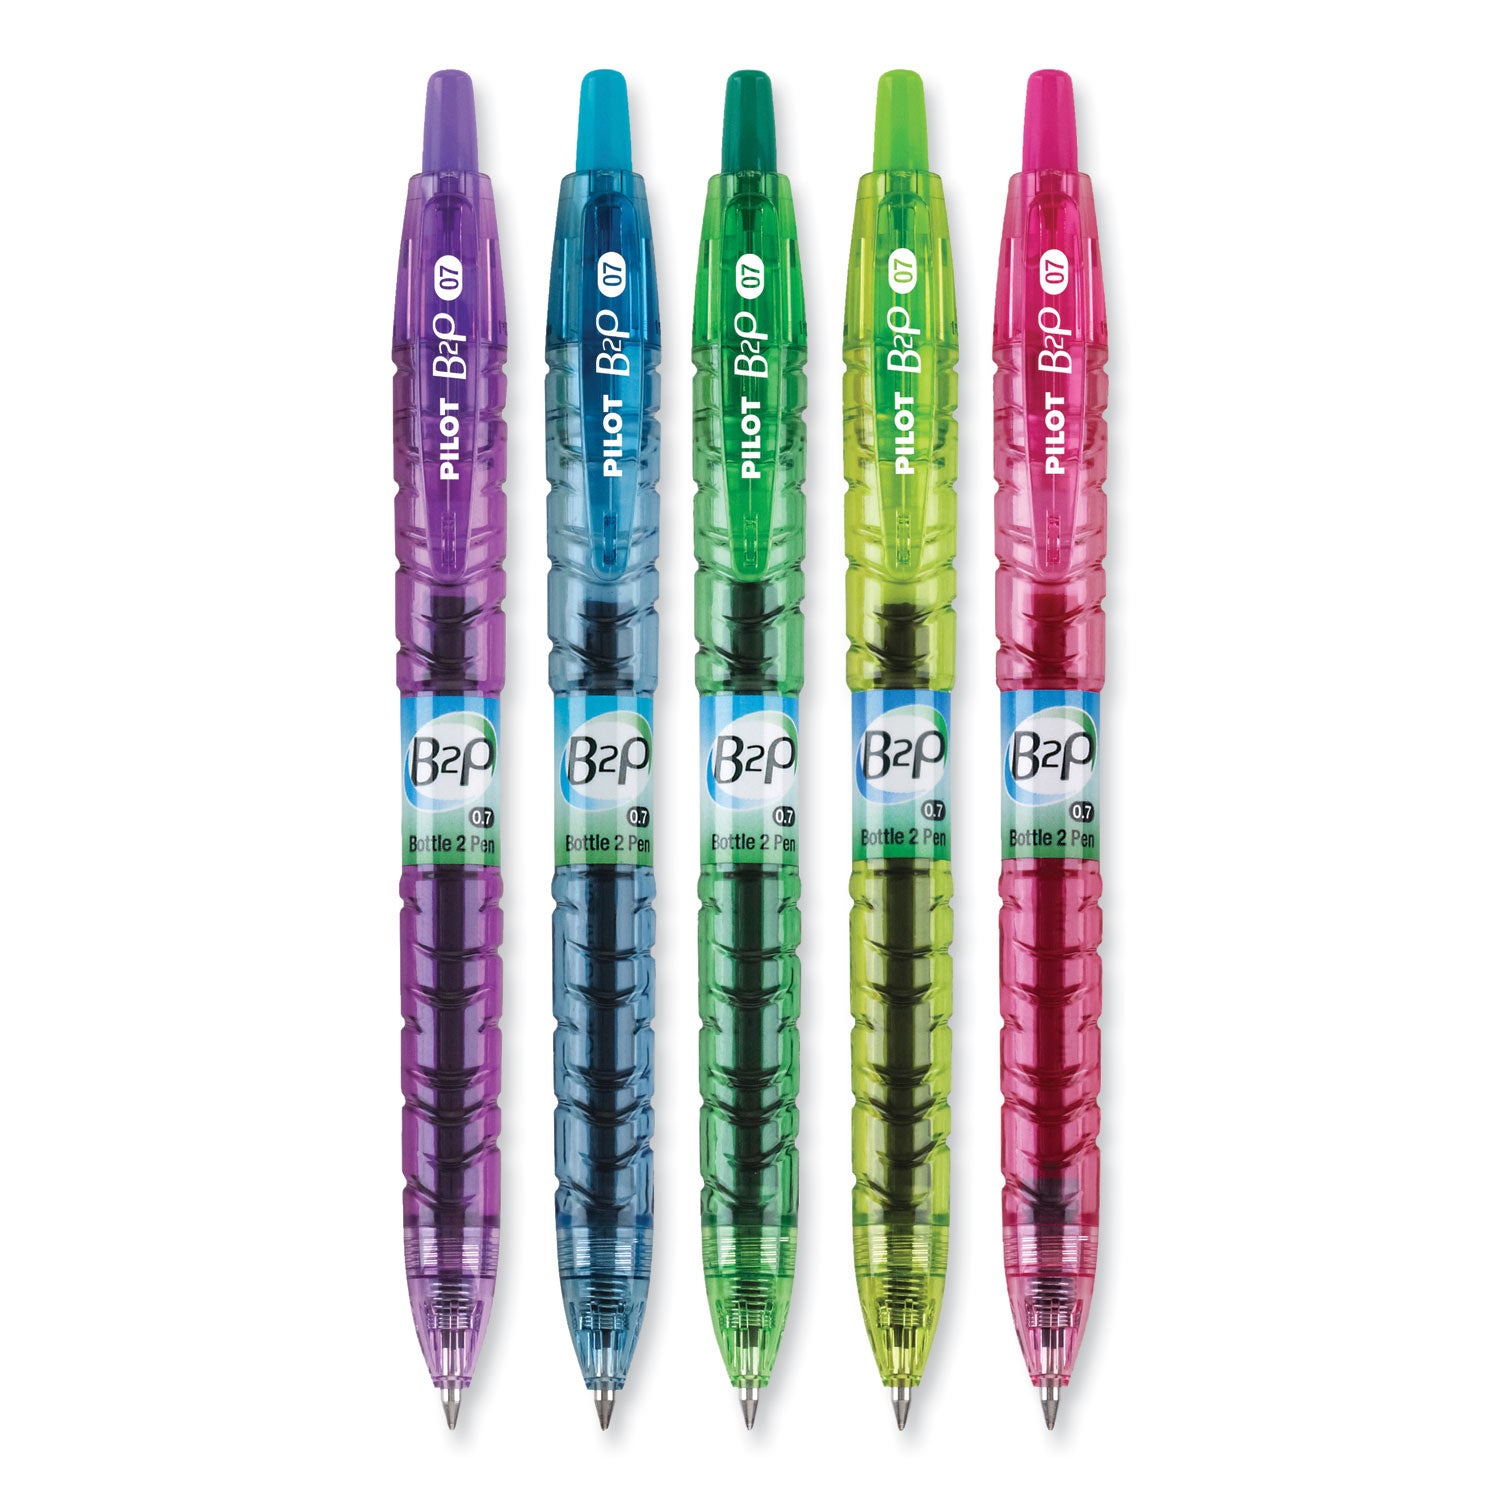 B2P Bottle-2-Pen Recycled Gel Pen, Retractable, Fine 0.7 mm, Assorted Ink and Barrel Colors, 5/Pack - 